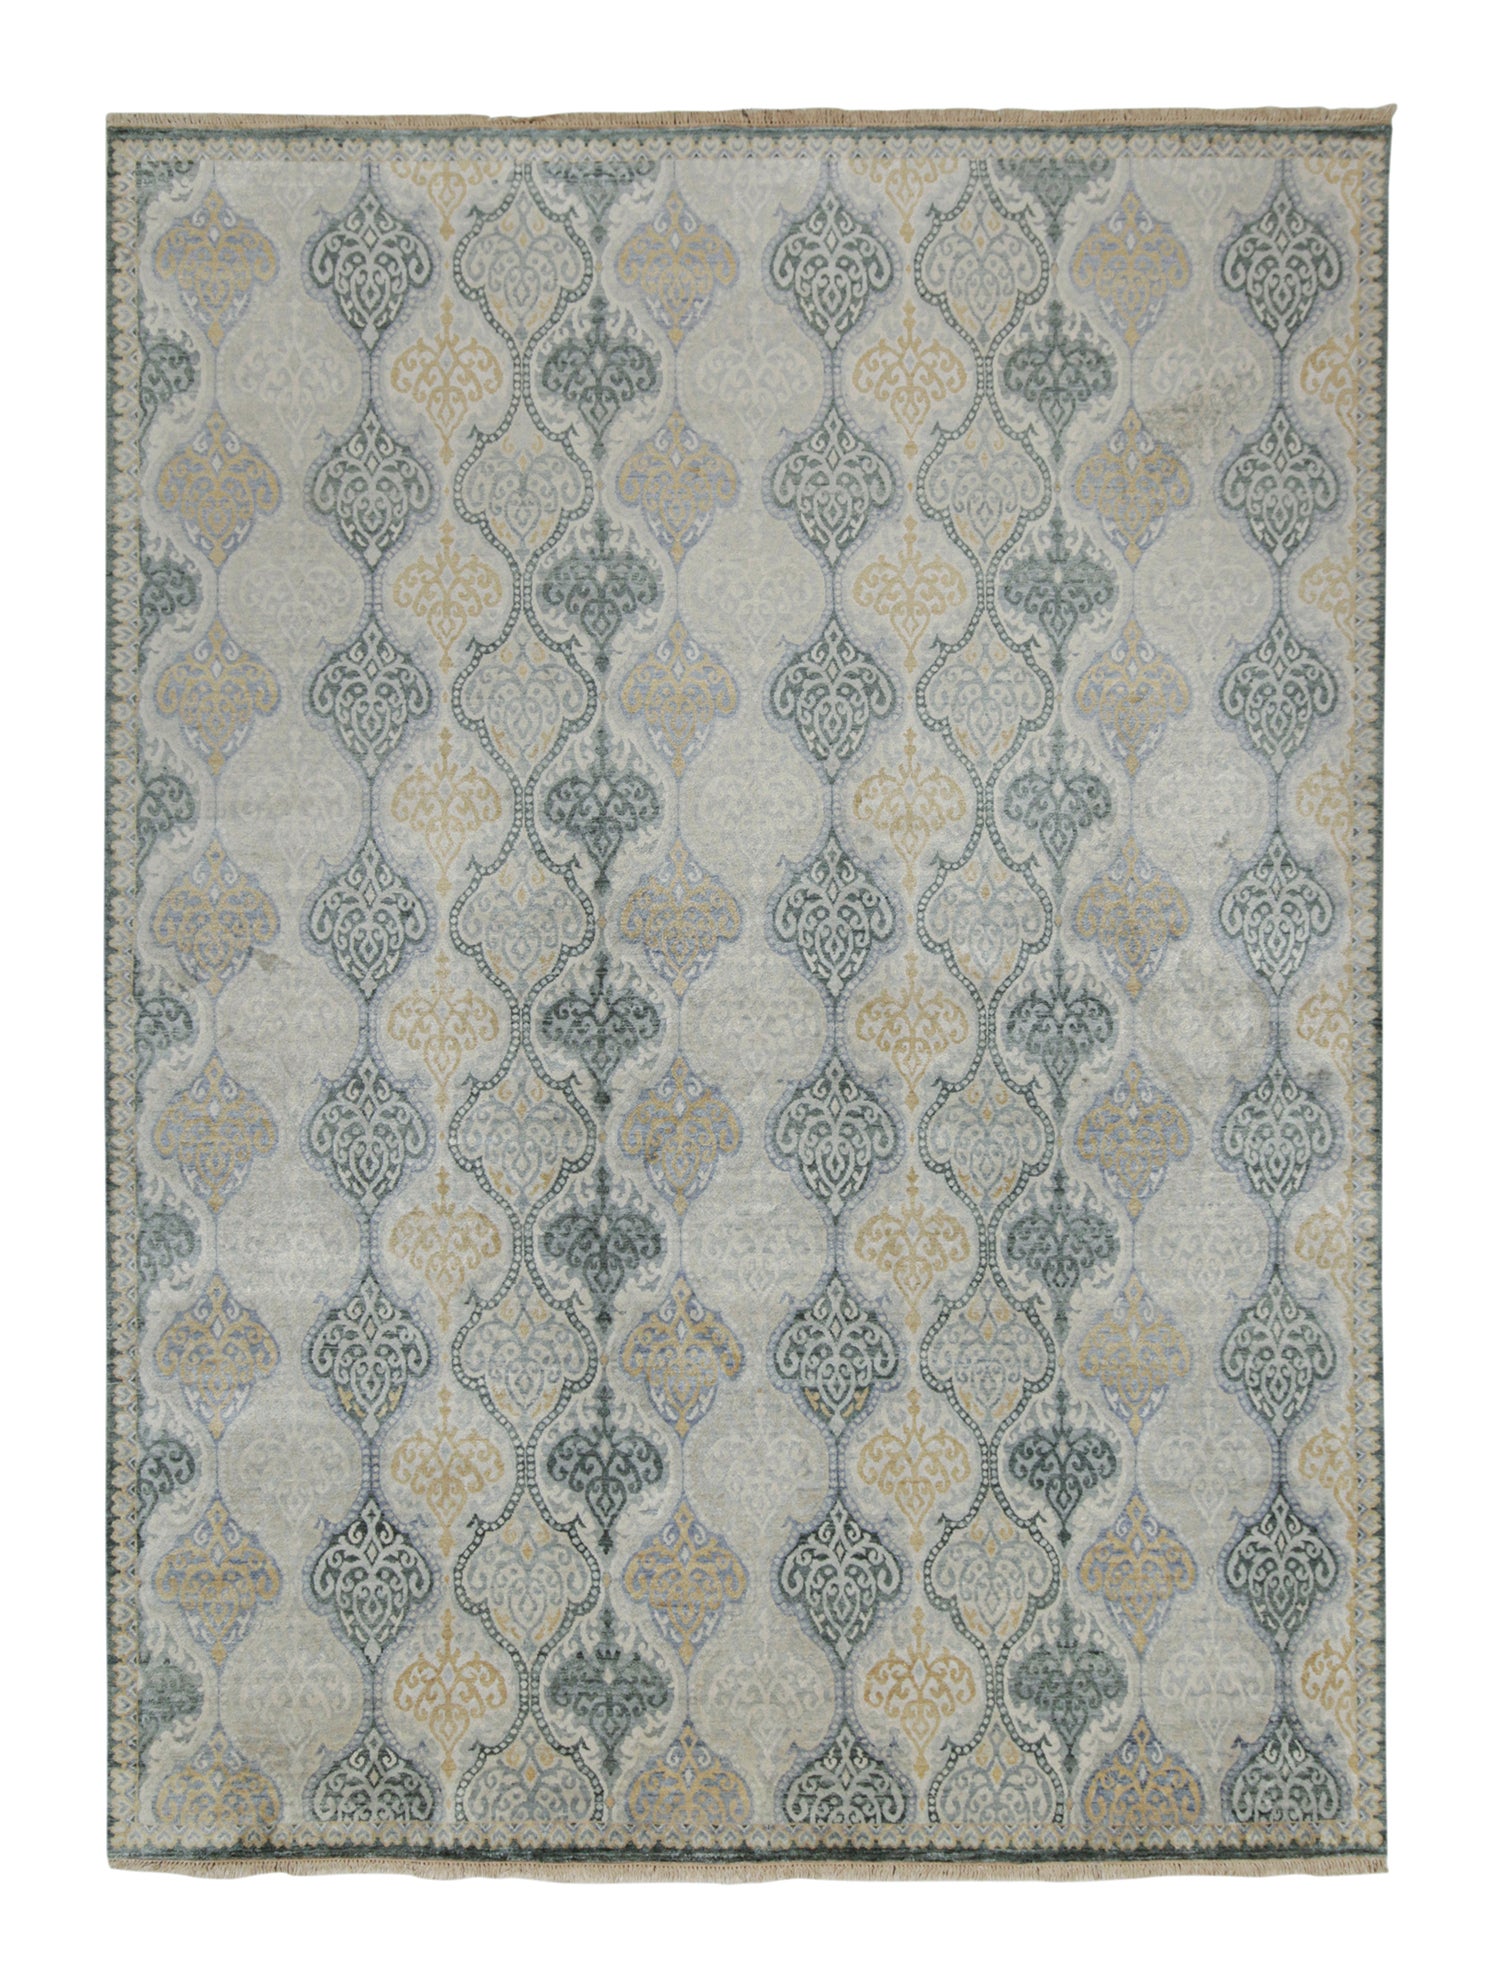 Rug & Kilim’s Classic Style Rug with Gray, Beige and Gold Pattern For Sale